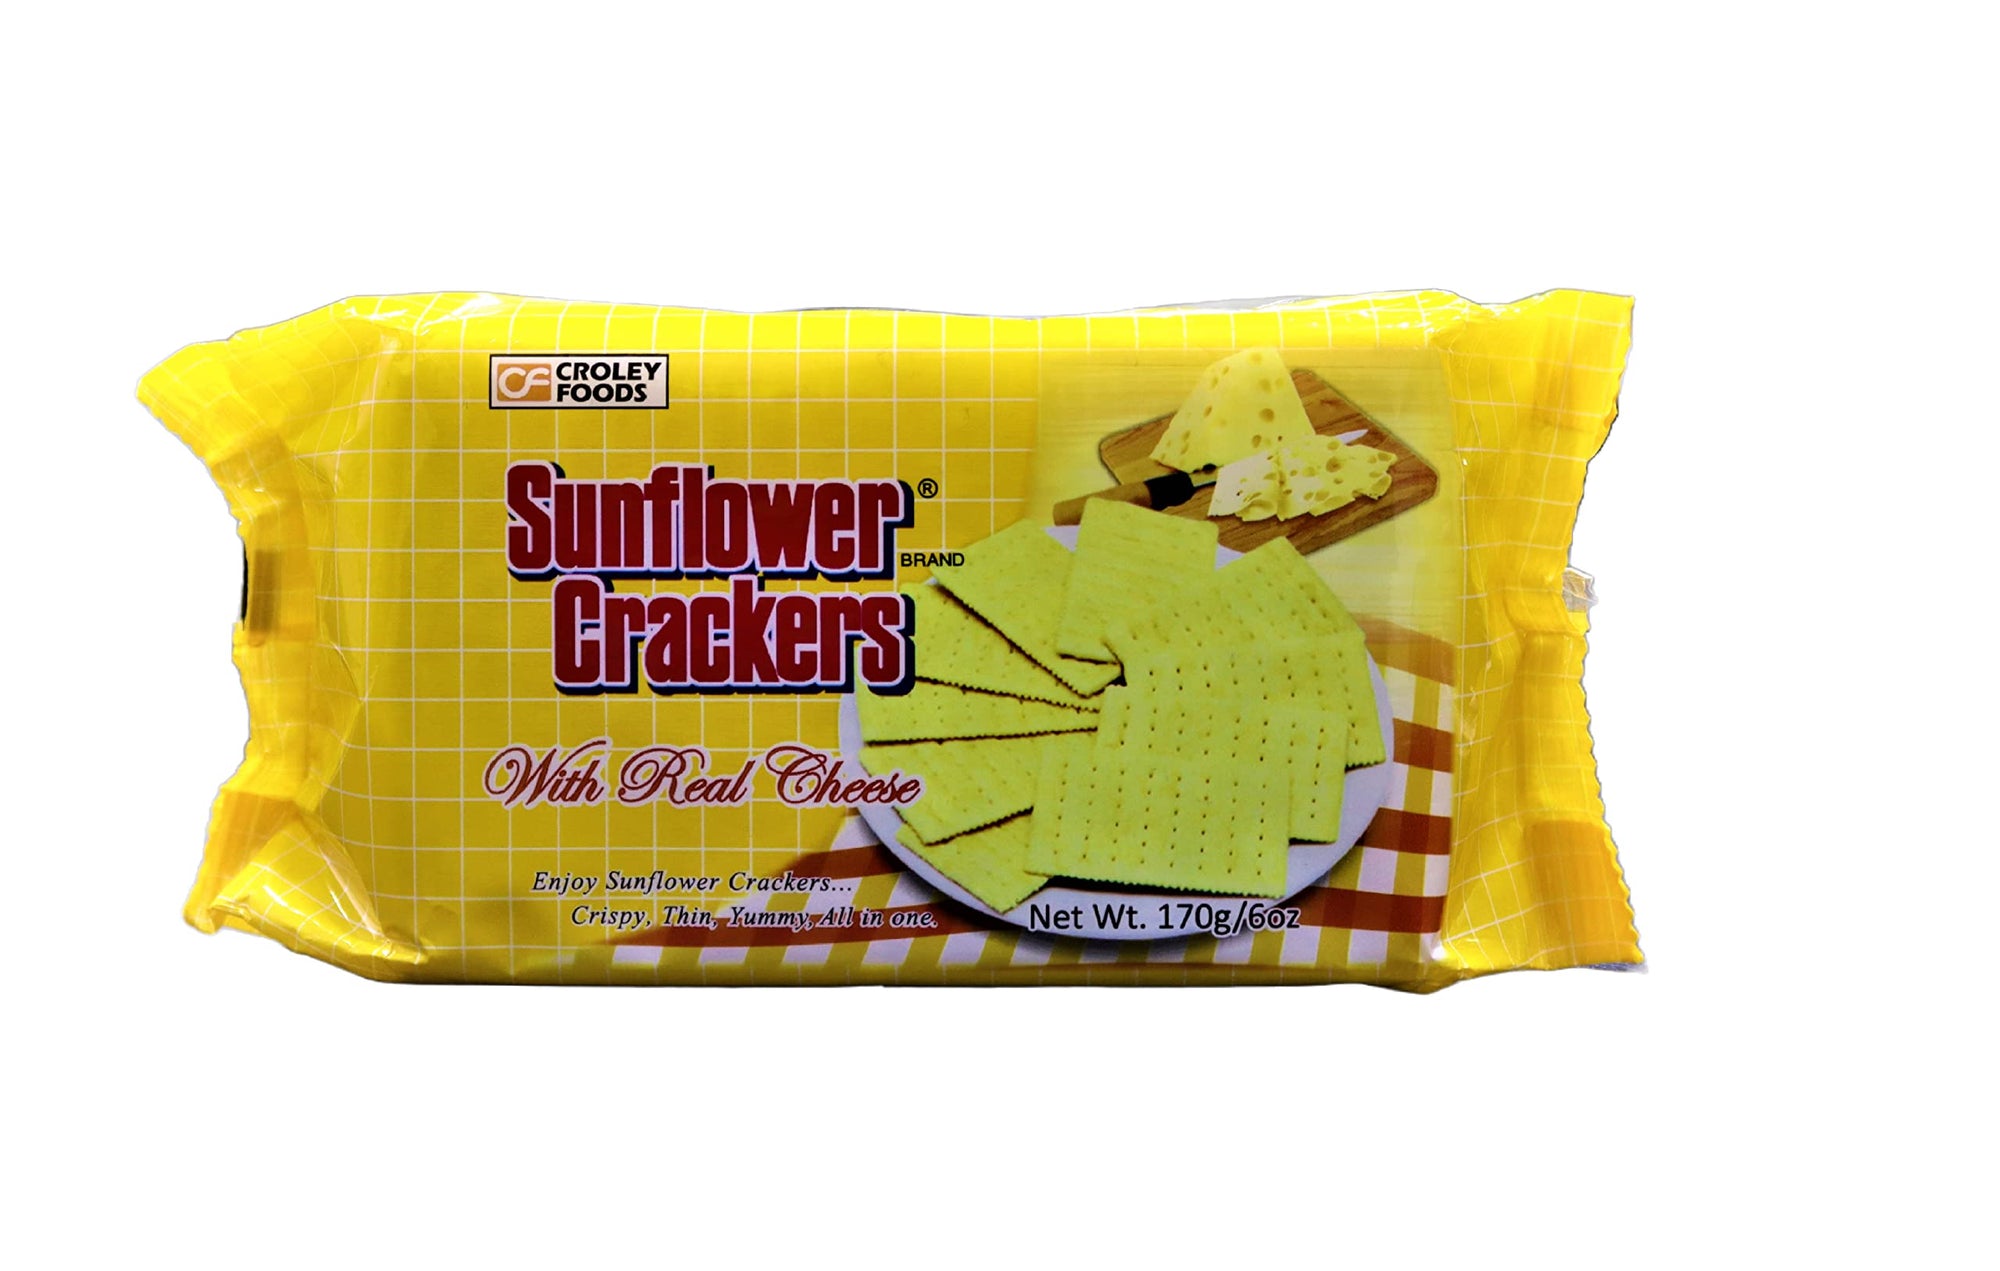 croley foods sunflower crackers with real cheese - 6oz